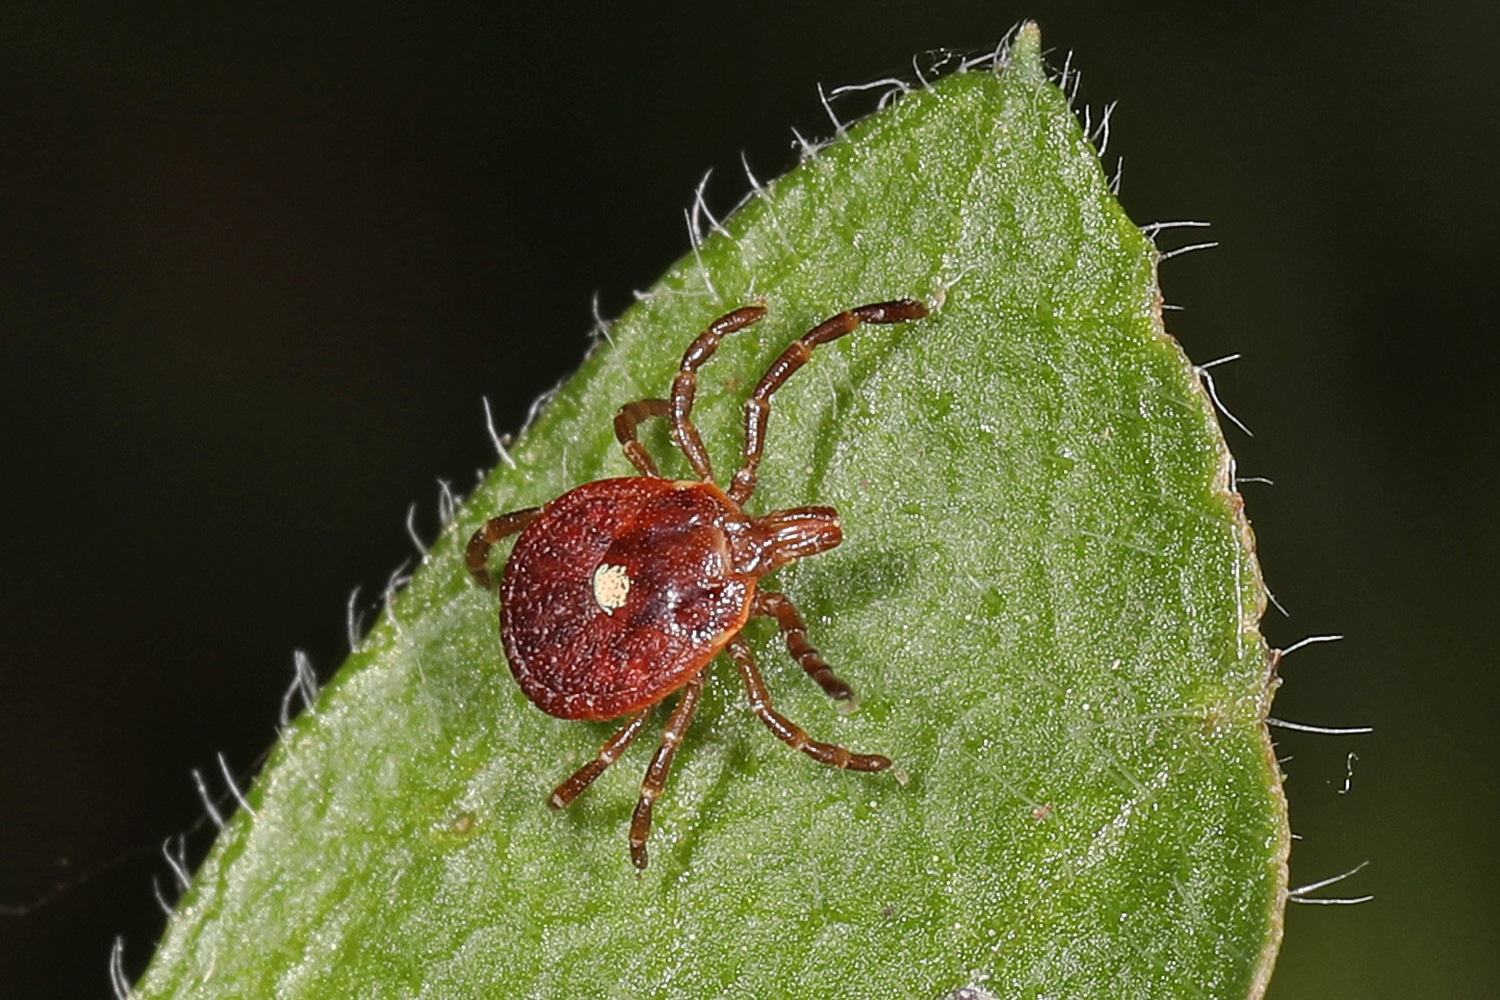 horizontal photo of a lone star tick on a leaf with a black background Image credit: Judy Gallagher on Flickr